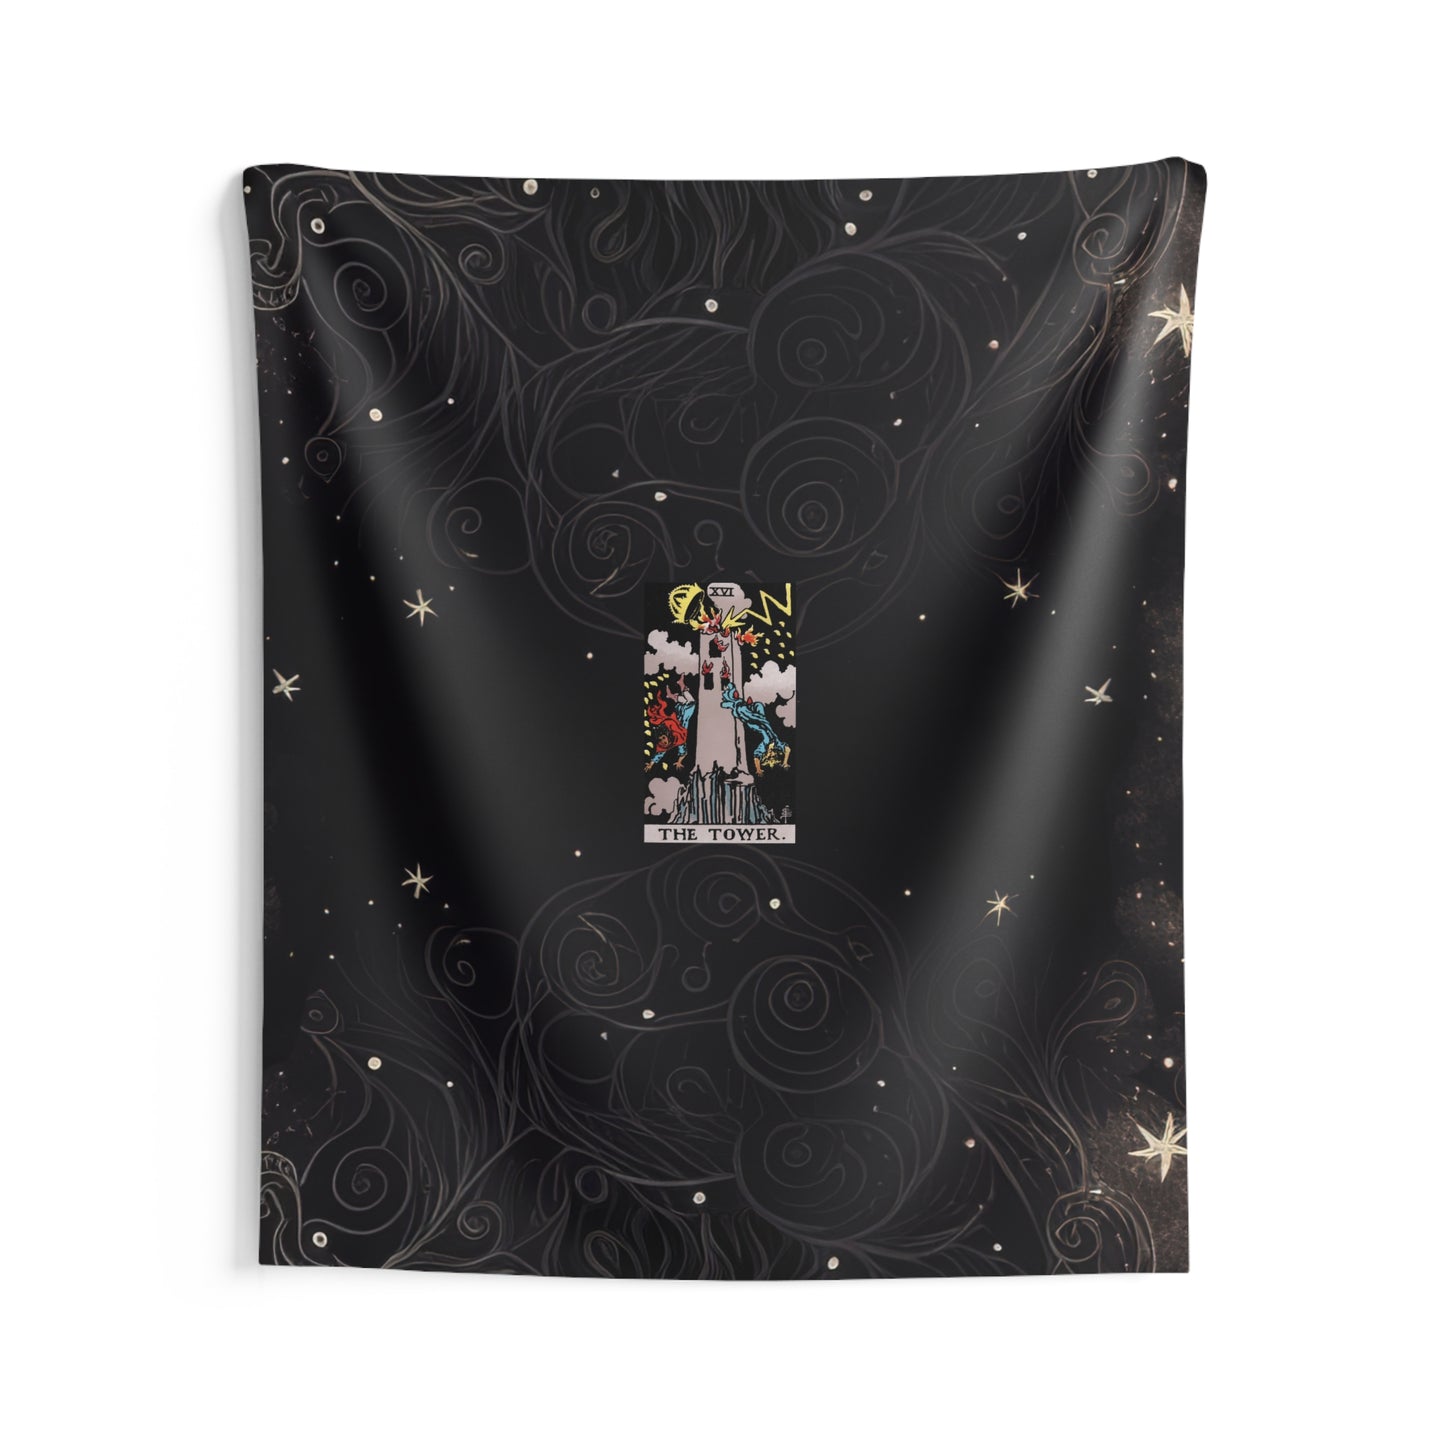 The Tower Tarot Card Altar Cloth or Tapestry with Starry Background